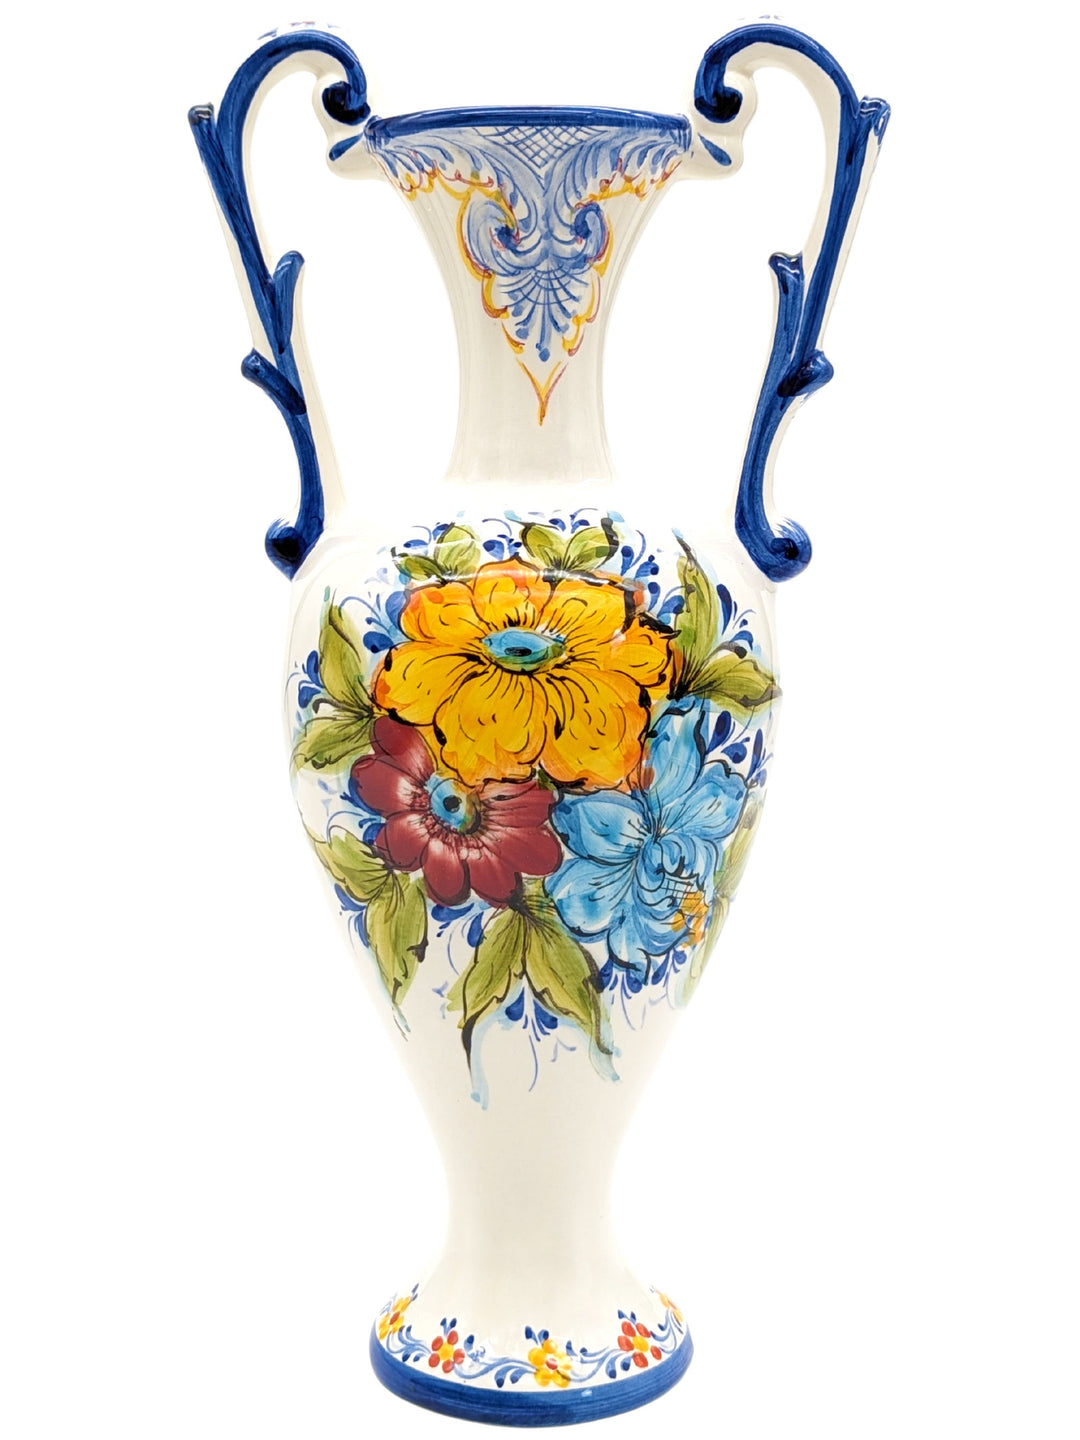 Hand Painted Portuguese Pottery Ceramic Flower Vase with Handles